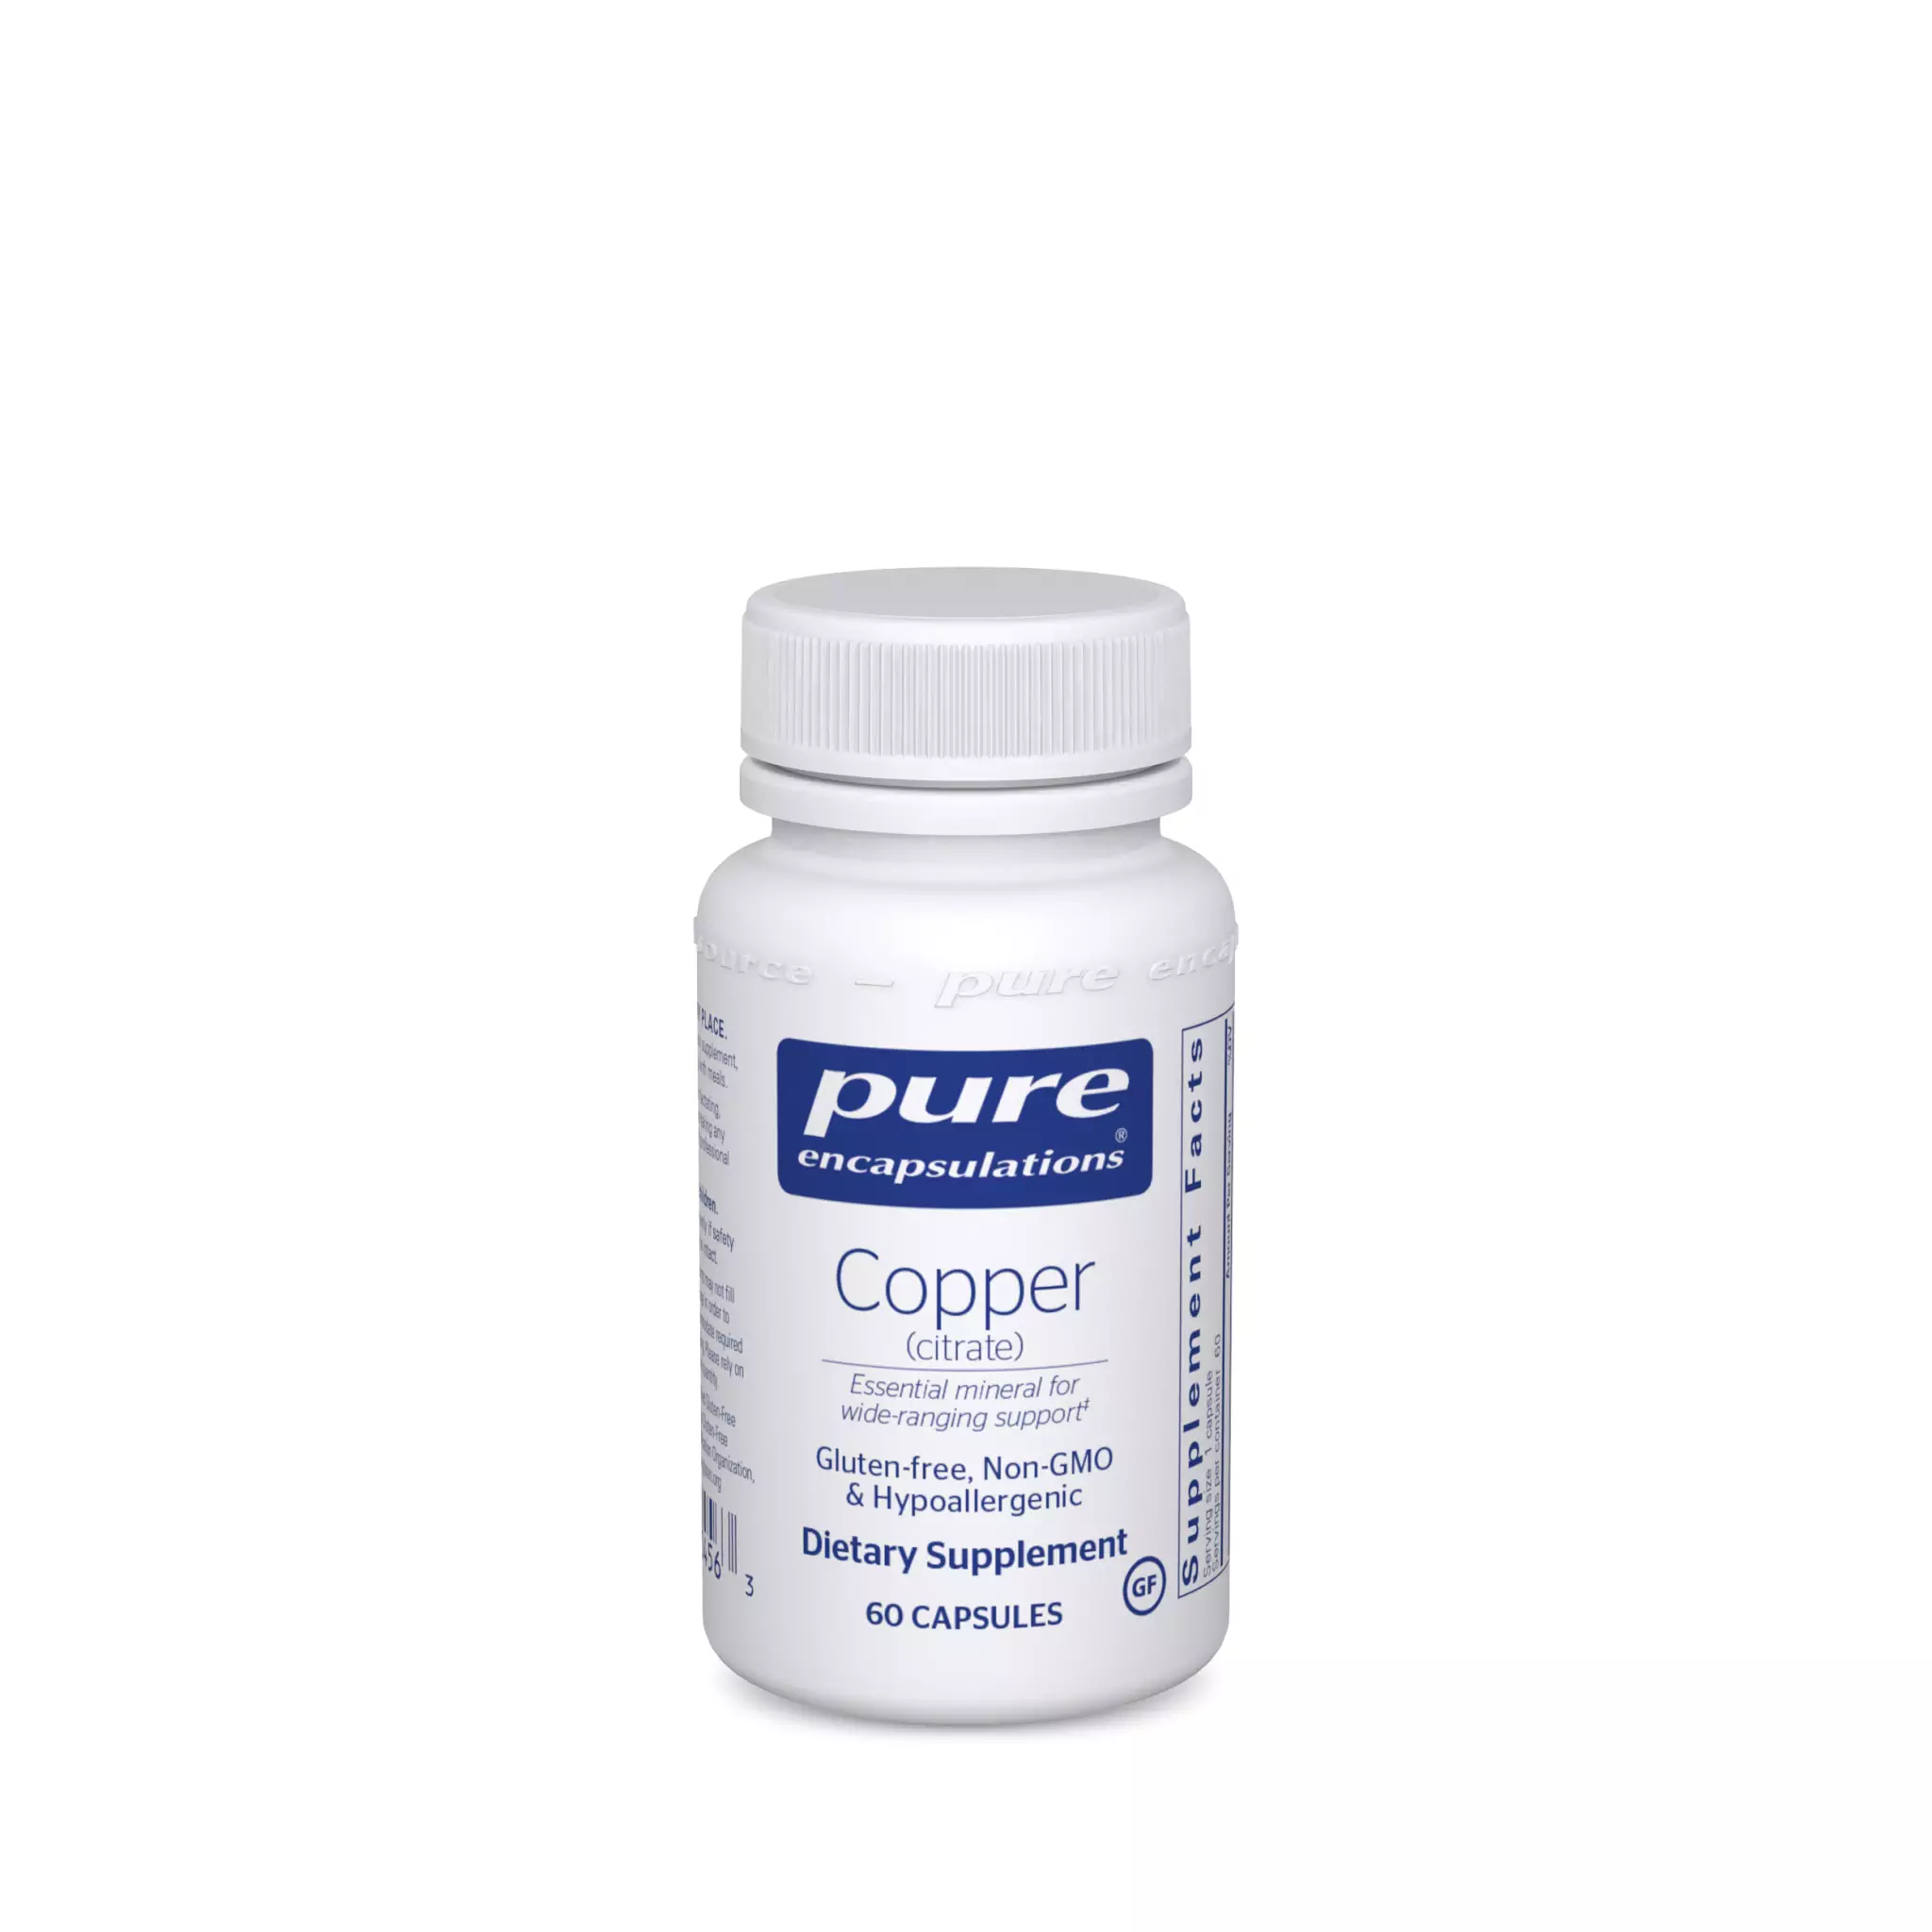 Pure Encapsulations - Copper 2 mg Citrate